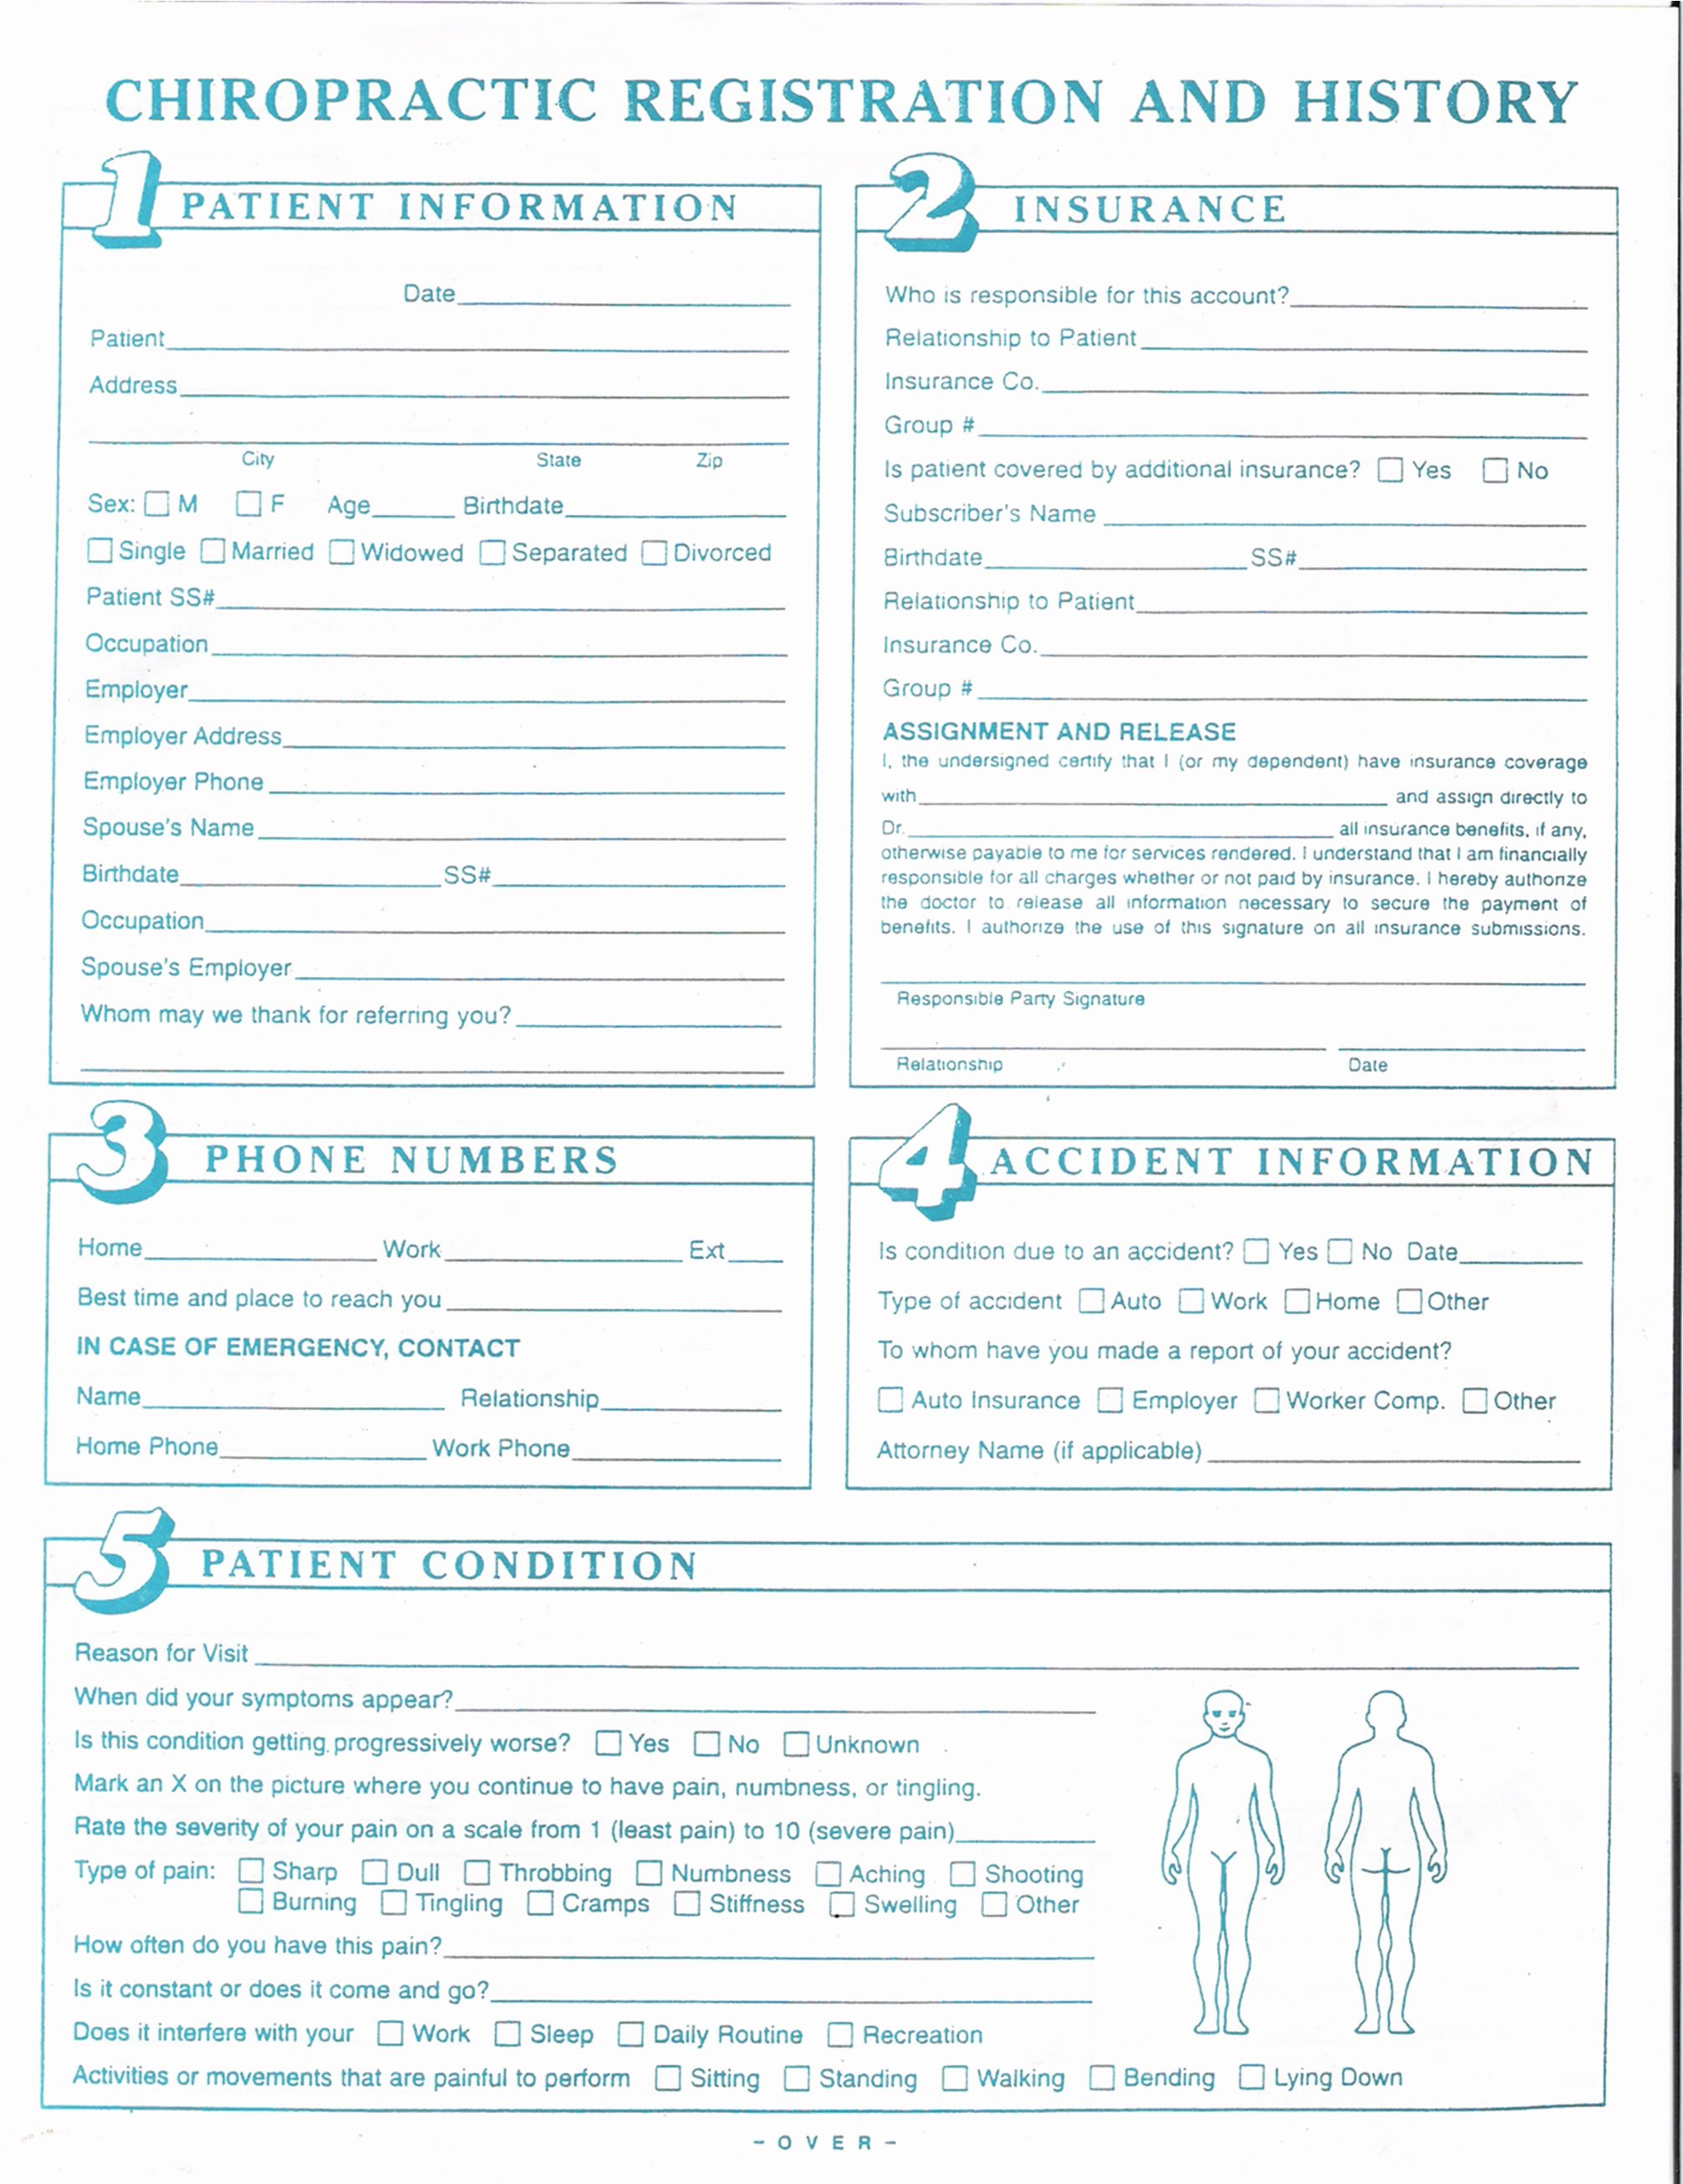 Chiropractic soap Notes Template Free Luxury Work Physical Exam Blank form Bing Images